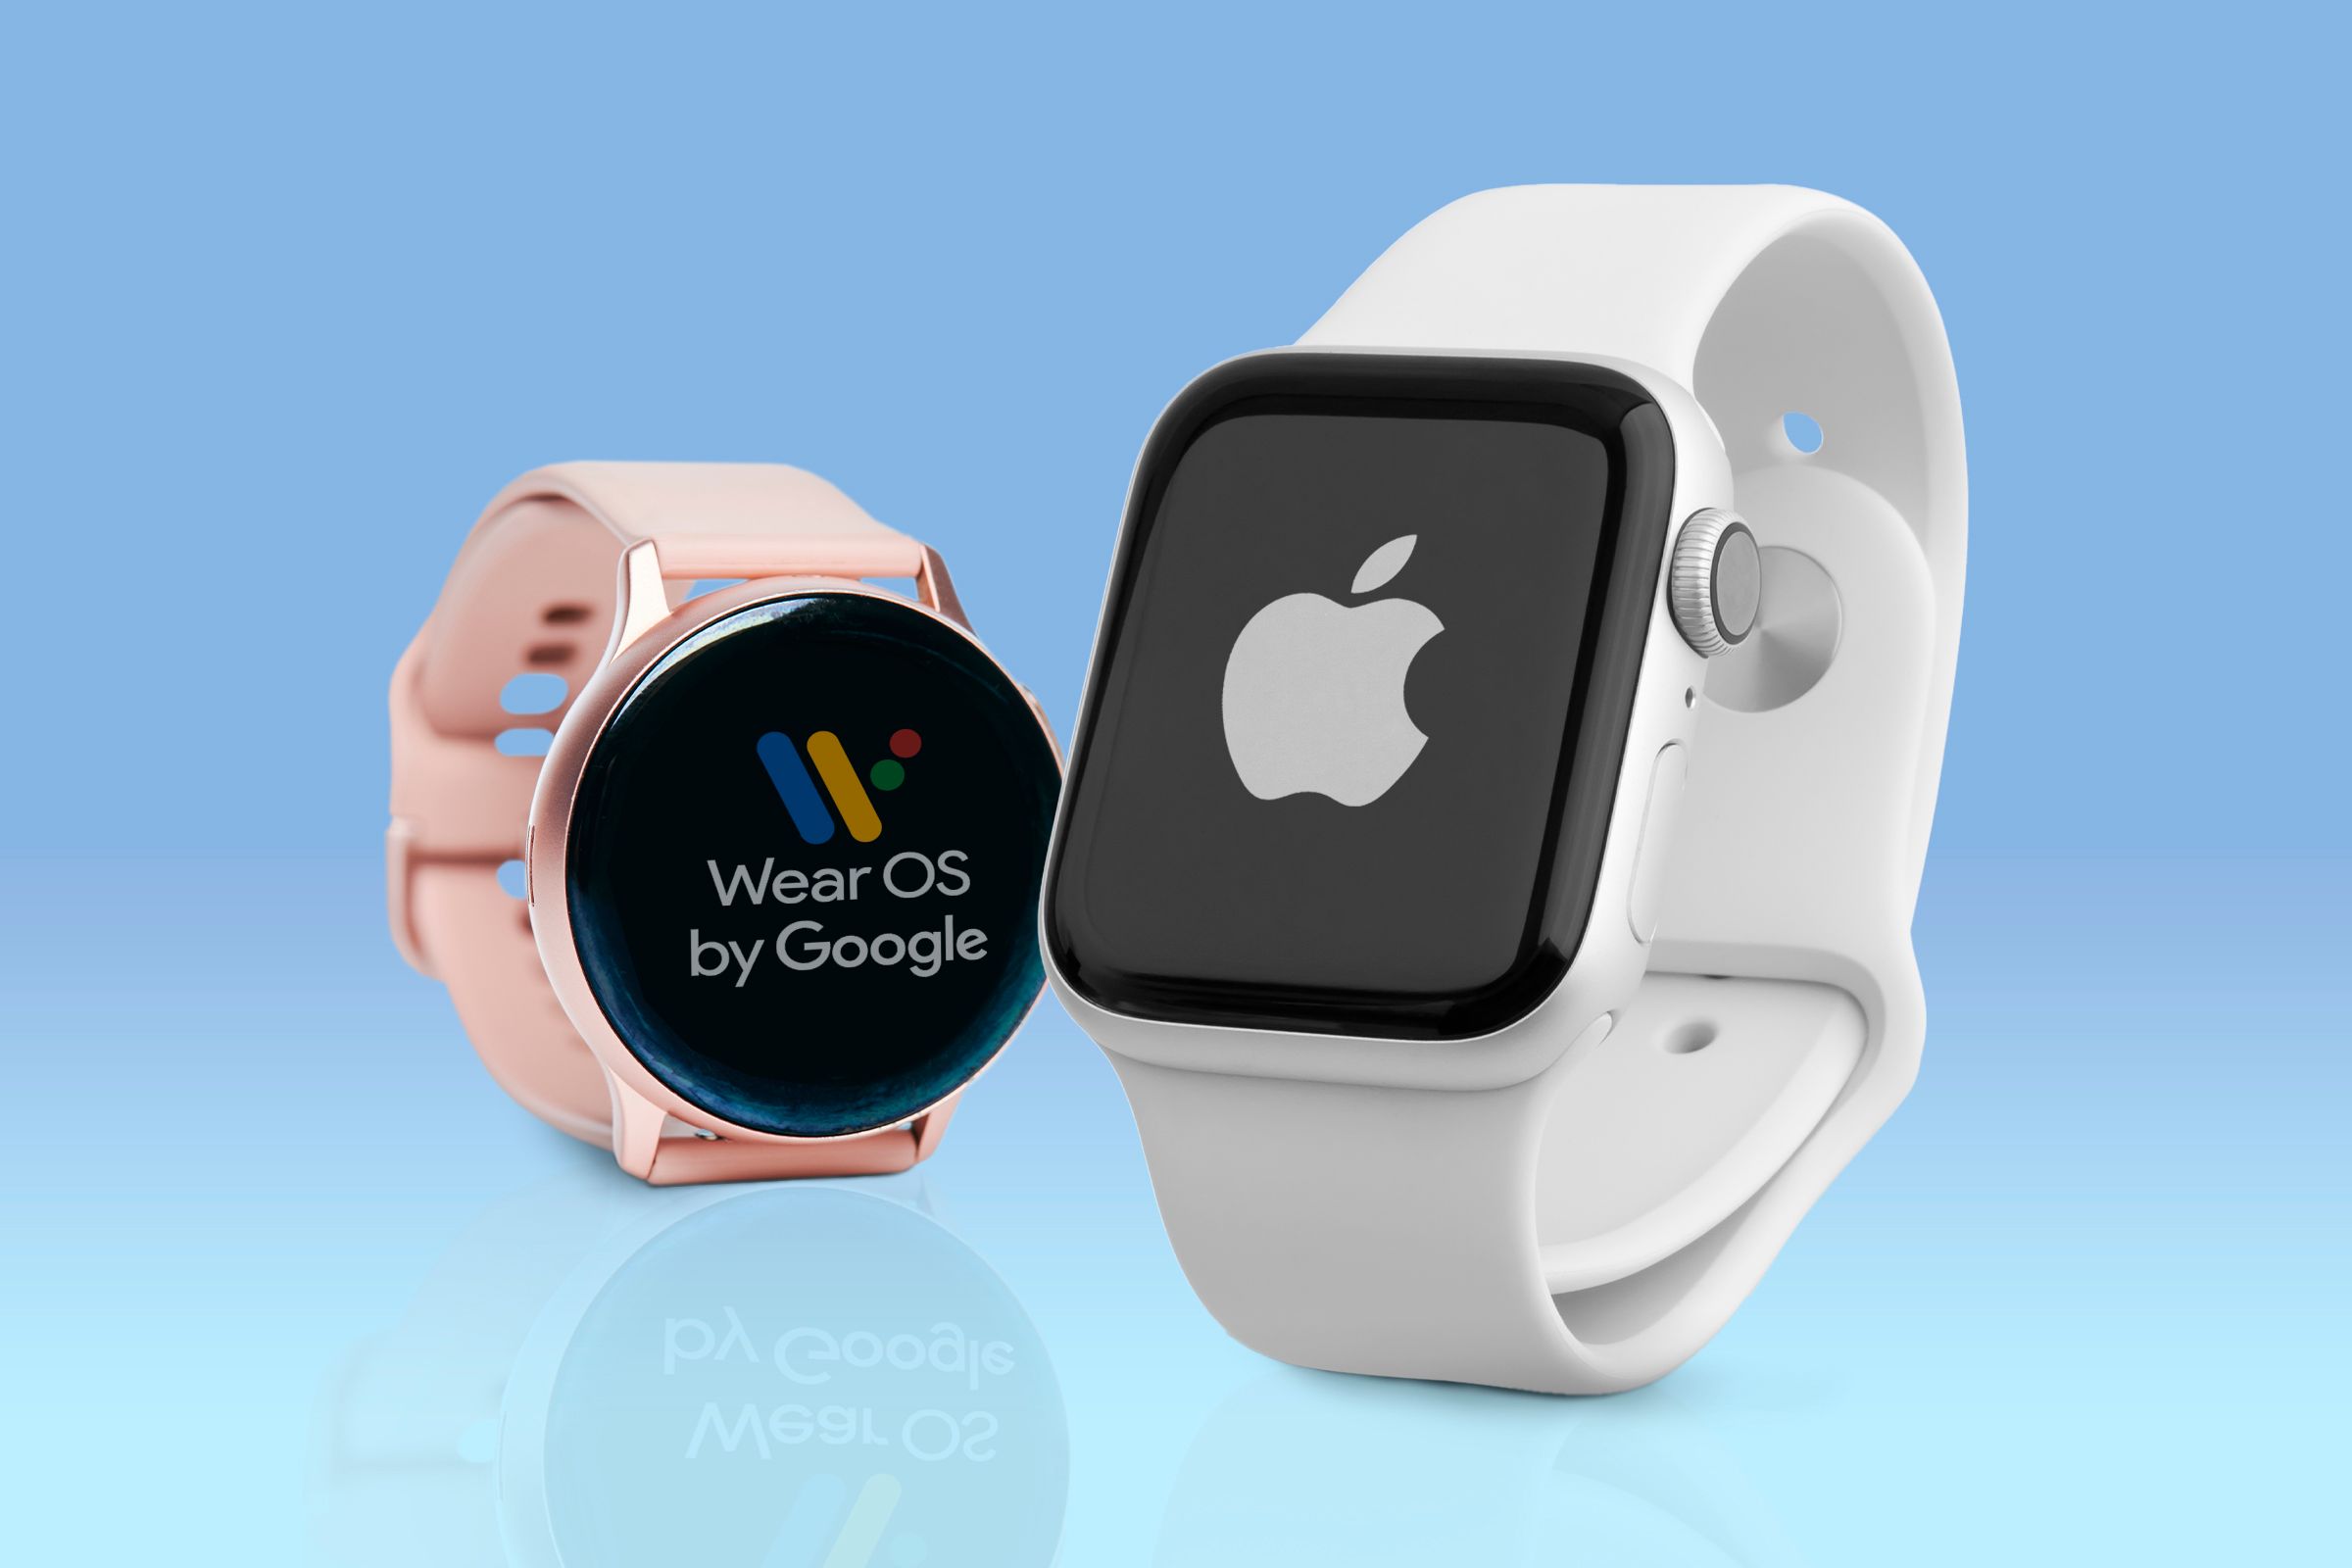 On the left, a Samsung watch with the wearOS logo on the screen, on the right, an apple watch with apple logo on the screen.